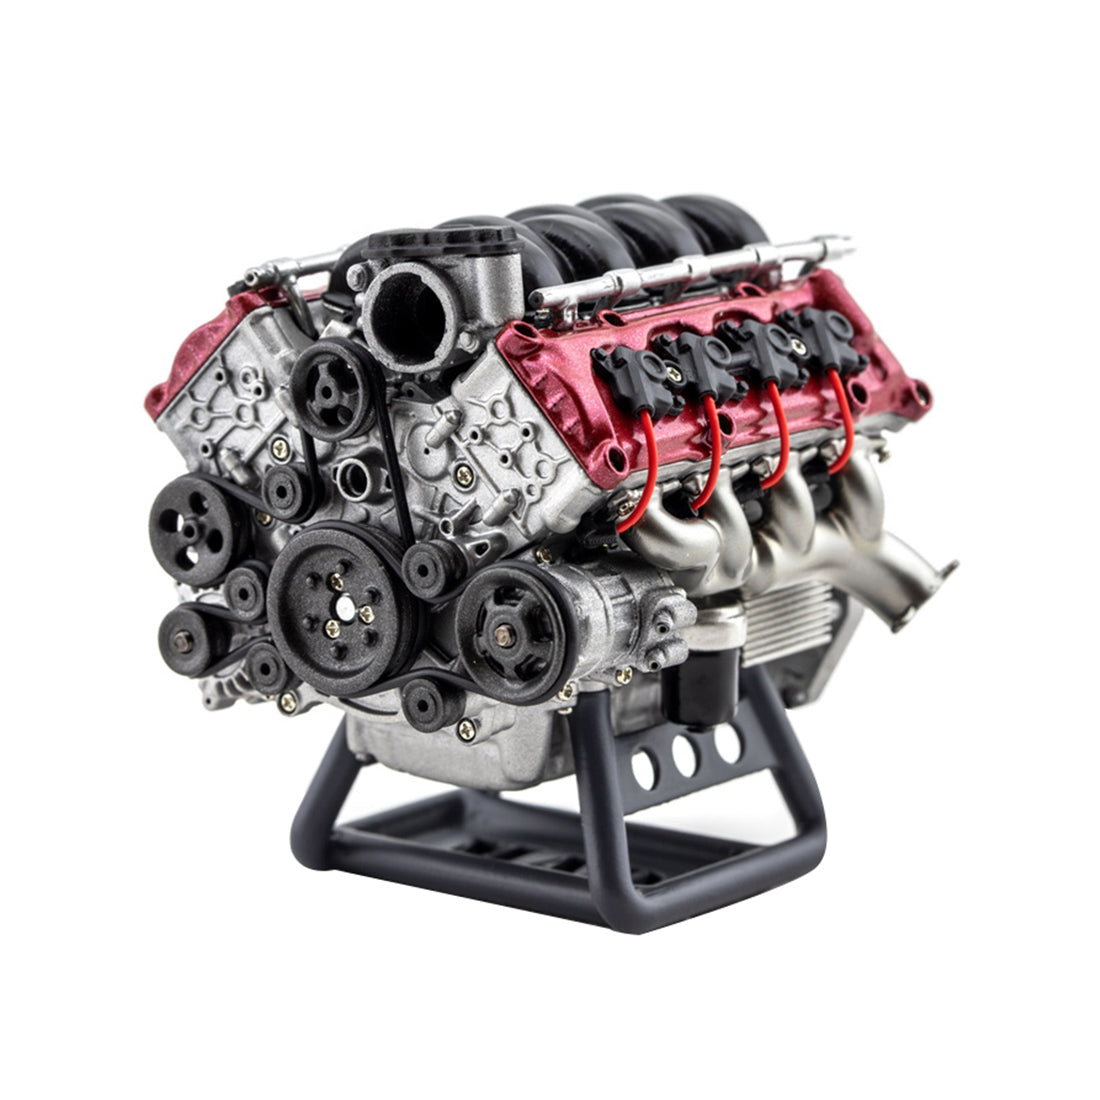 Build Your Own Engine